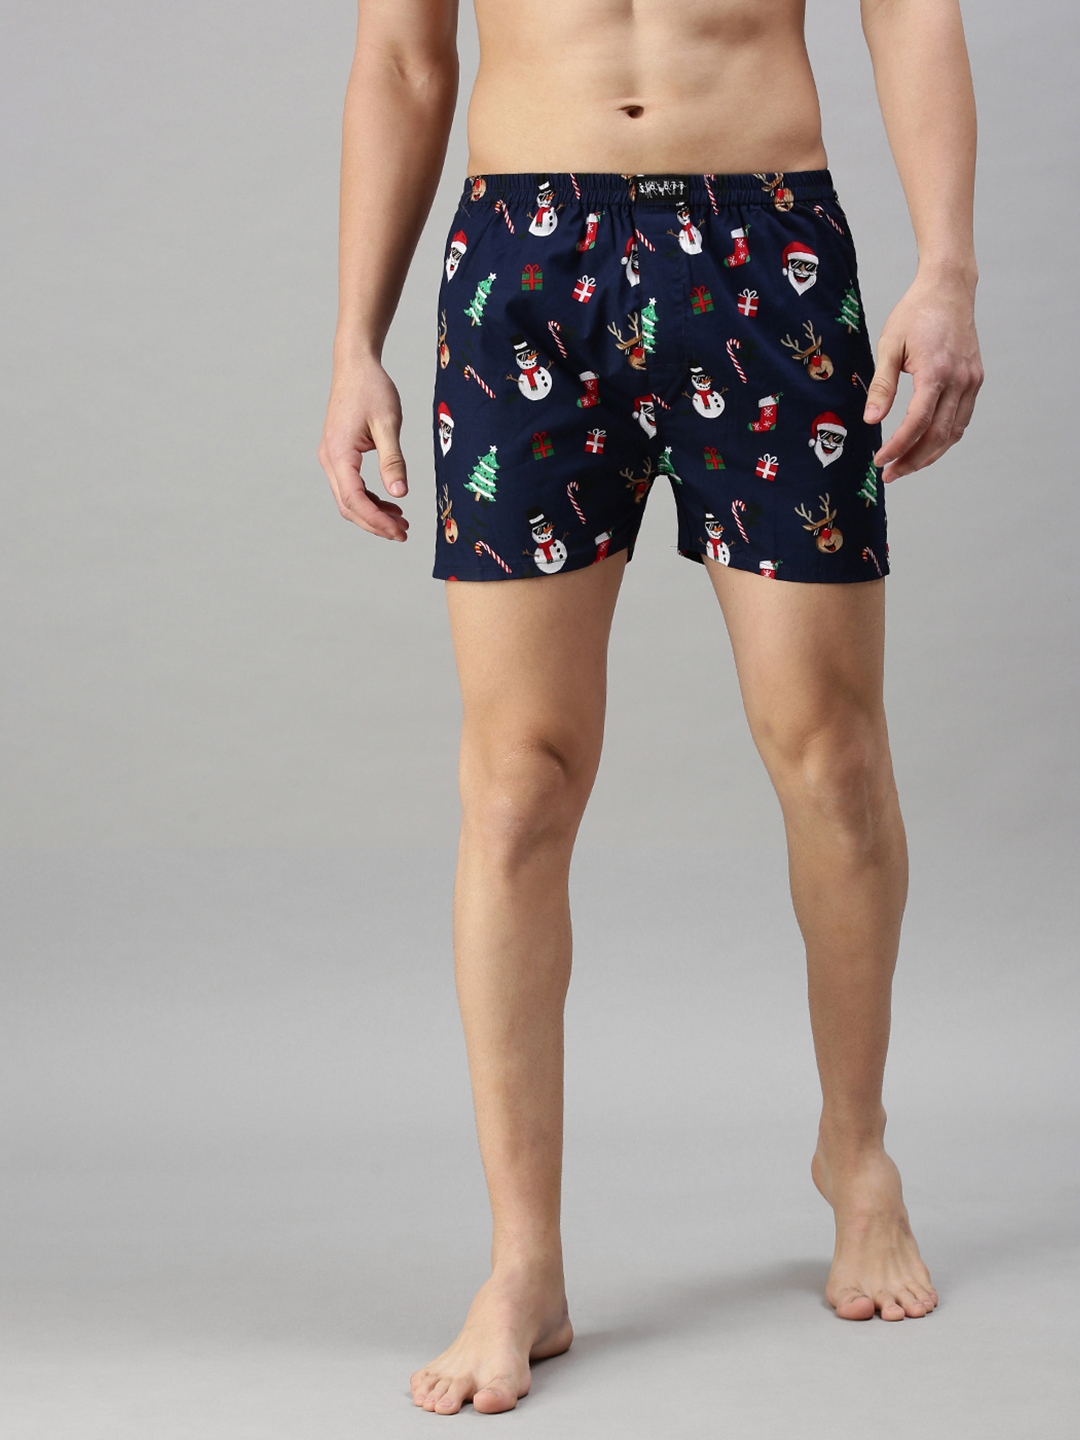 Pack of 2 Men's Casual Printed Cotton Boxers